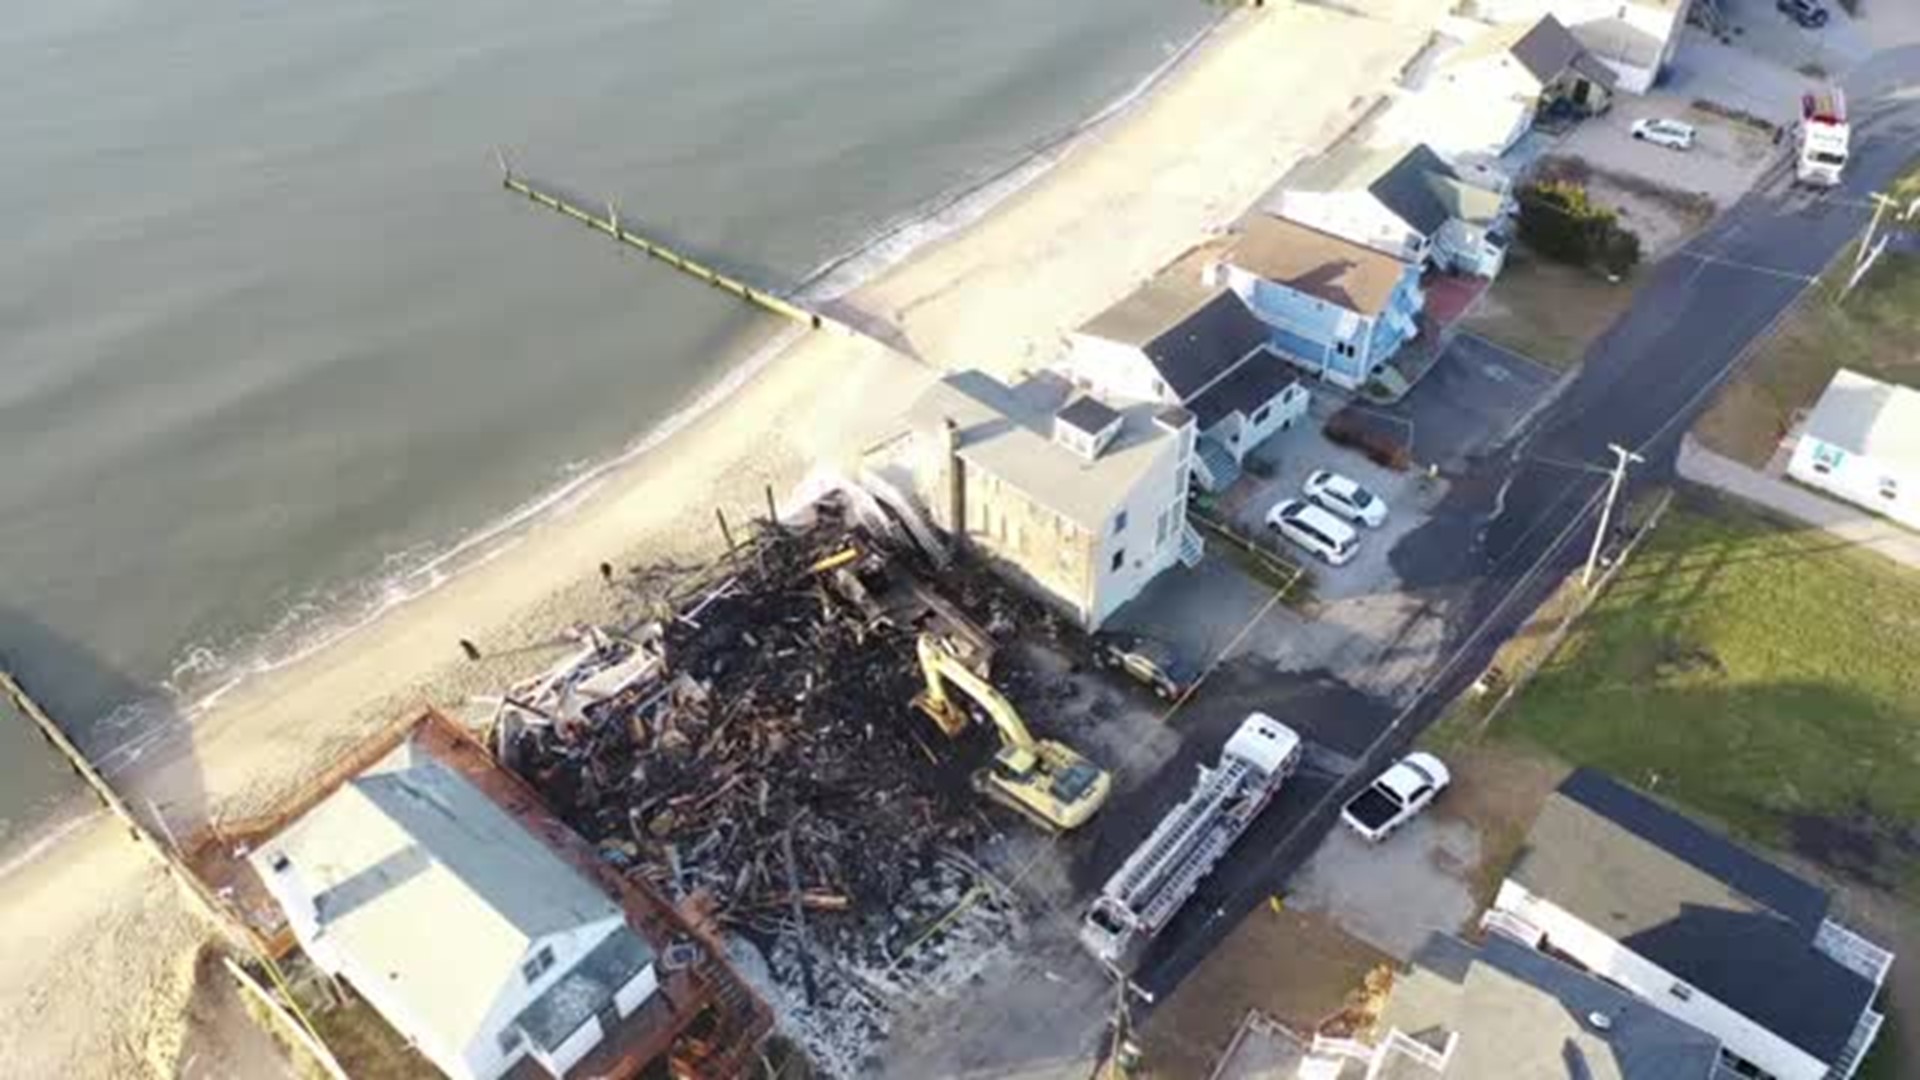 OLD SAYBROOK DRONE FIRE.mp4